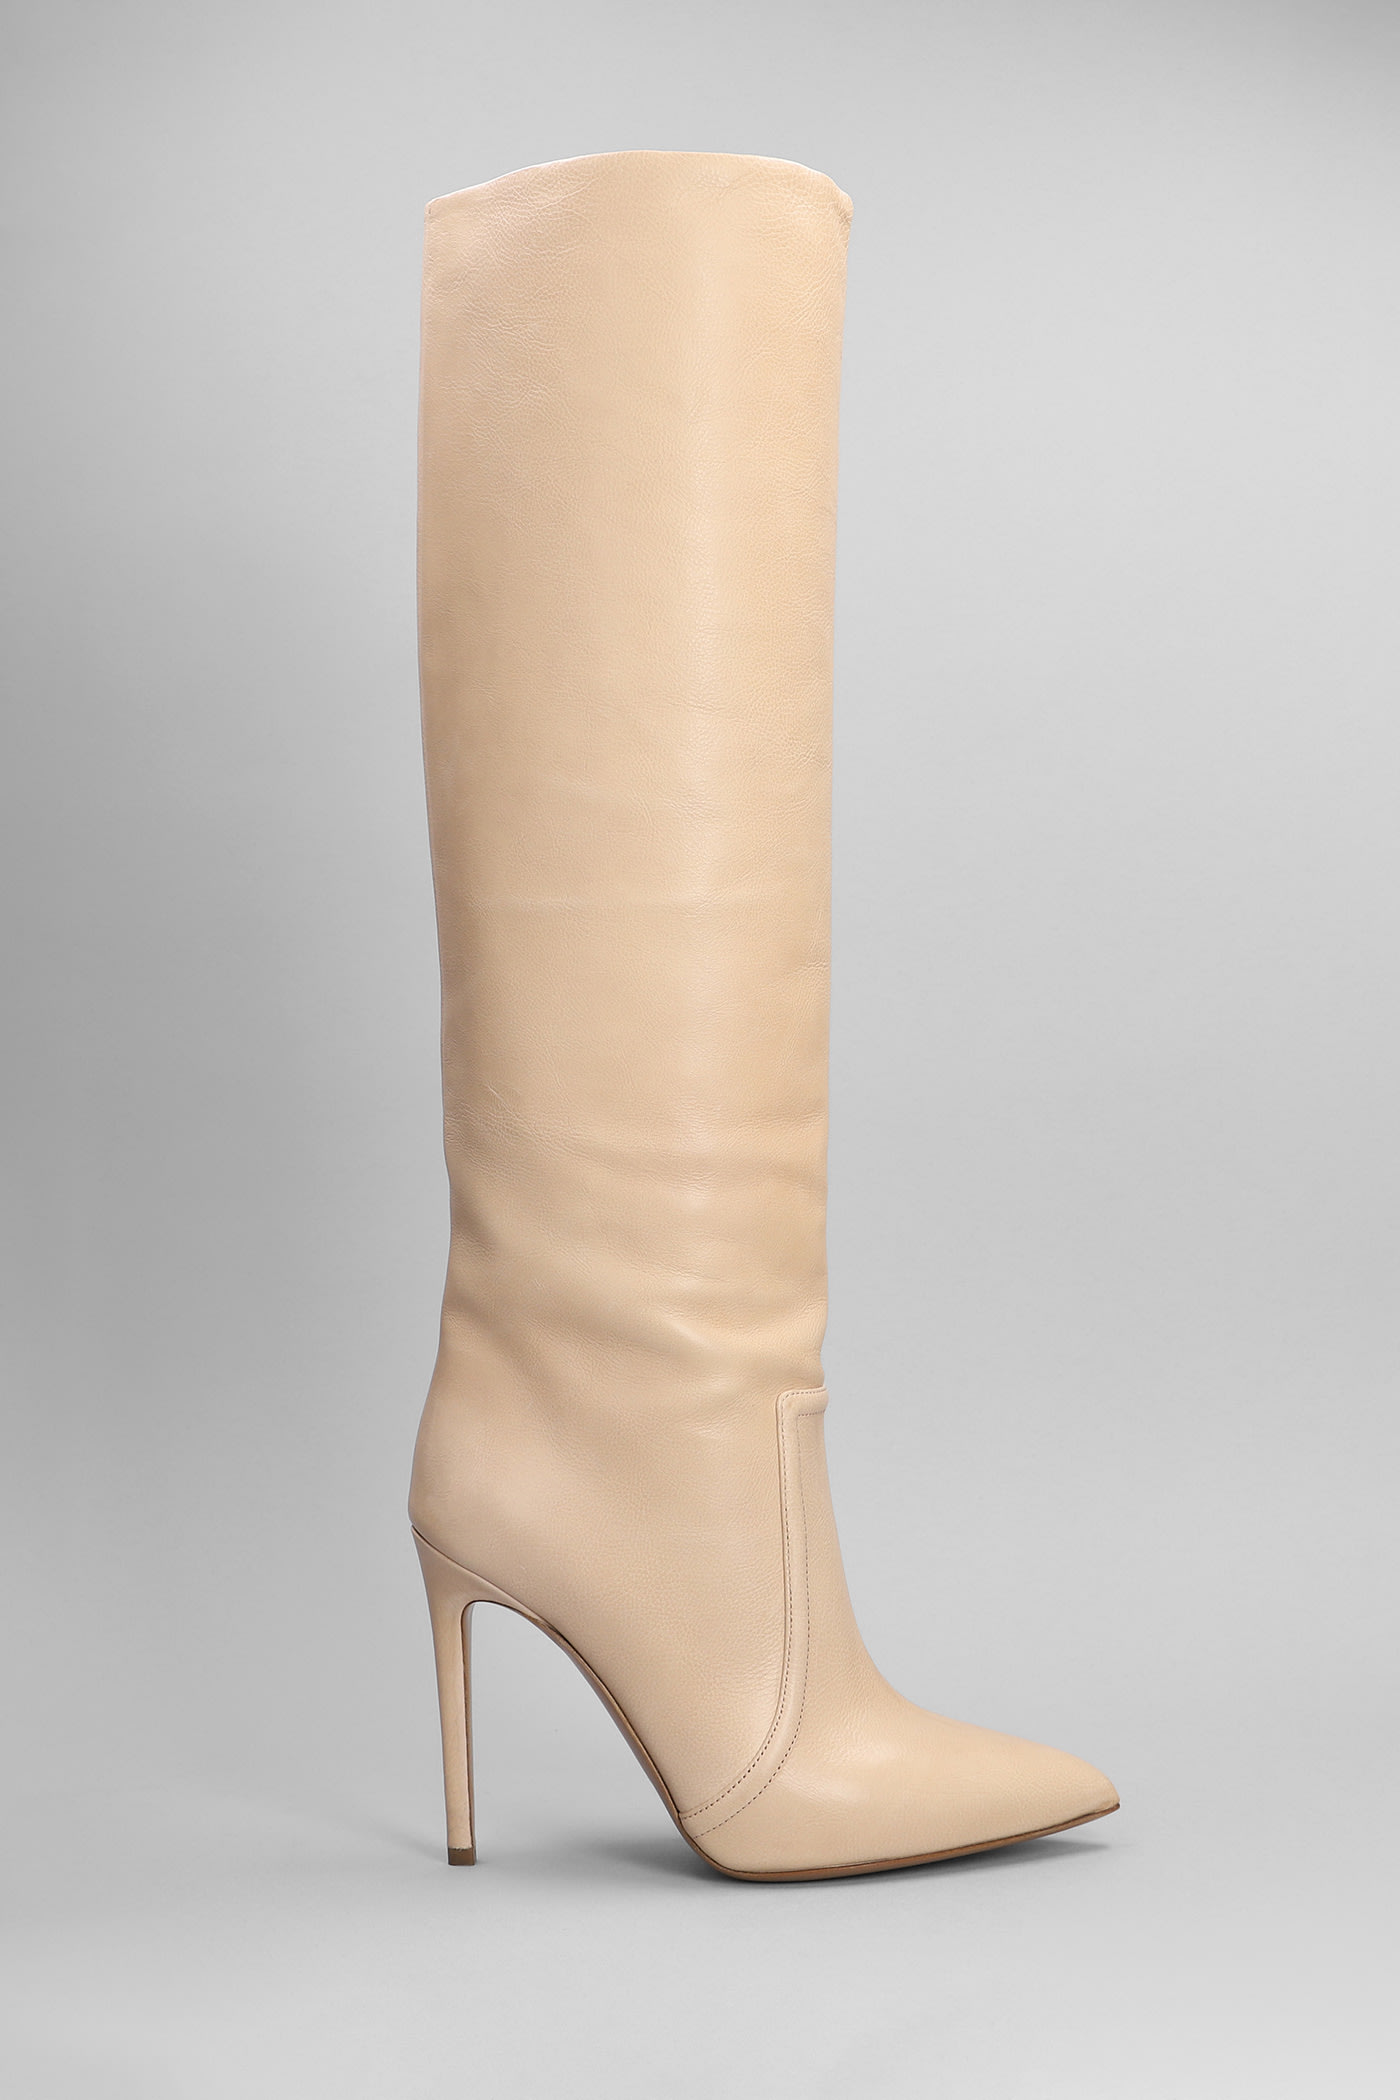 Paris Texas High Heels Boots In Powder Leather